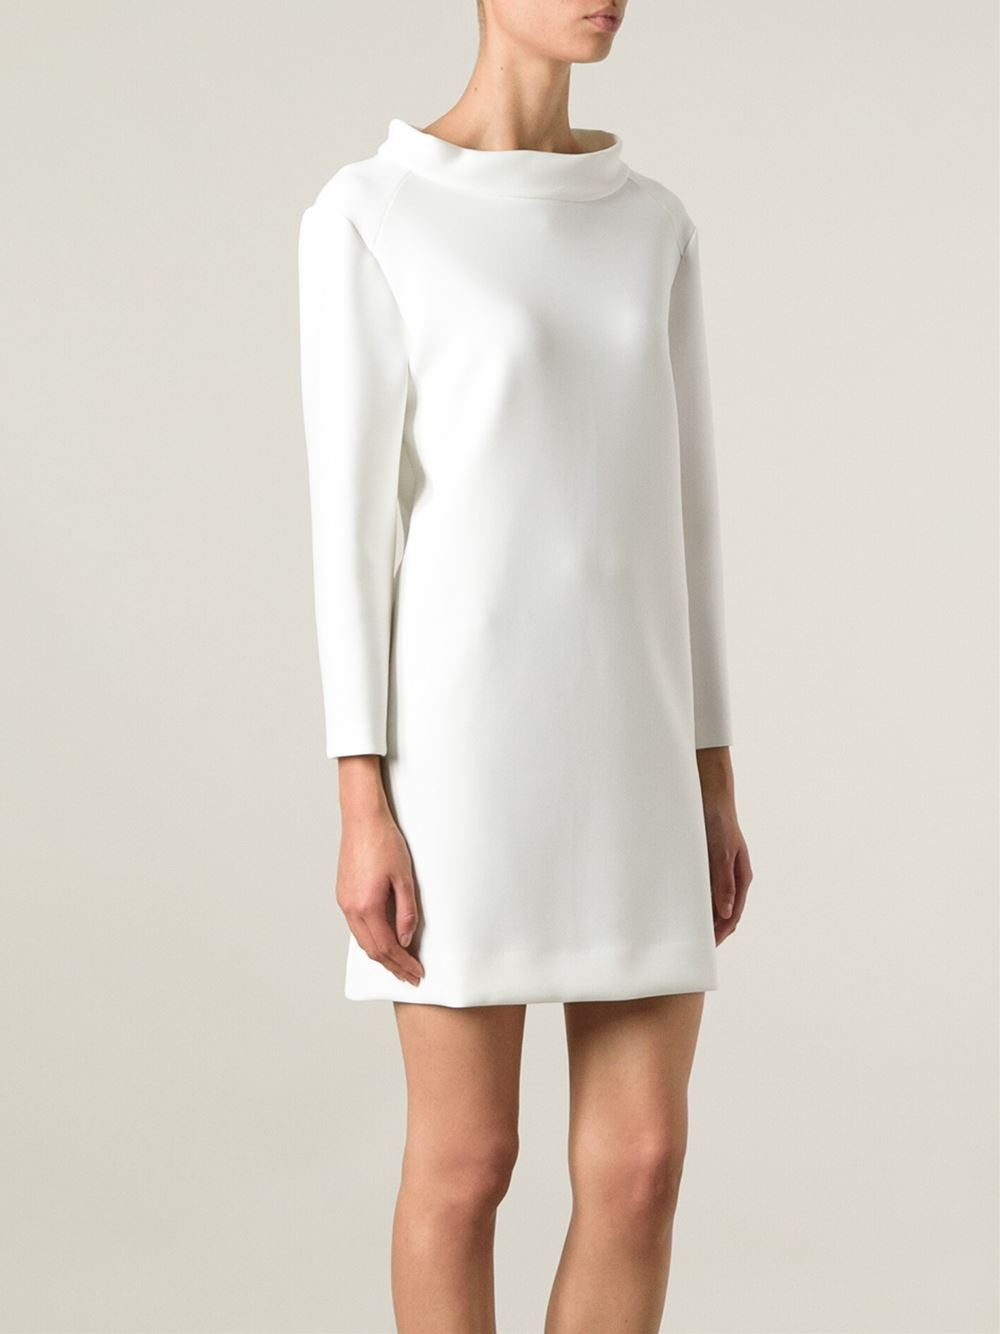 Courreges Funnel Neck Fitted Mini Dress in White - Lyst